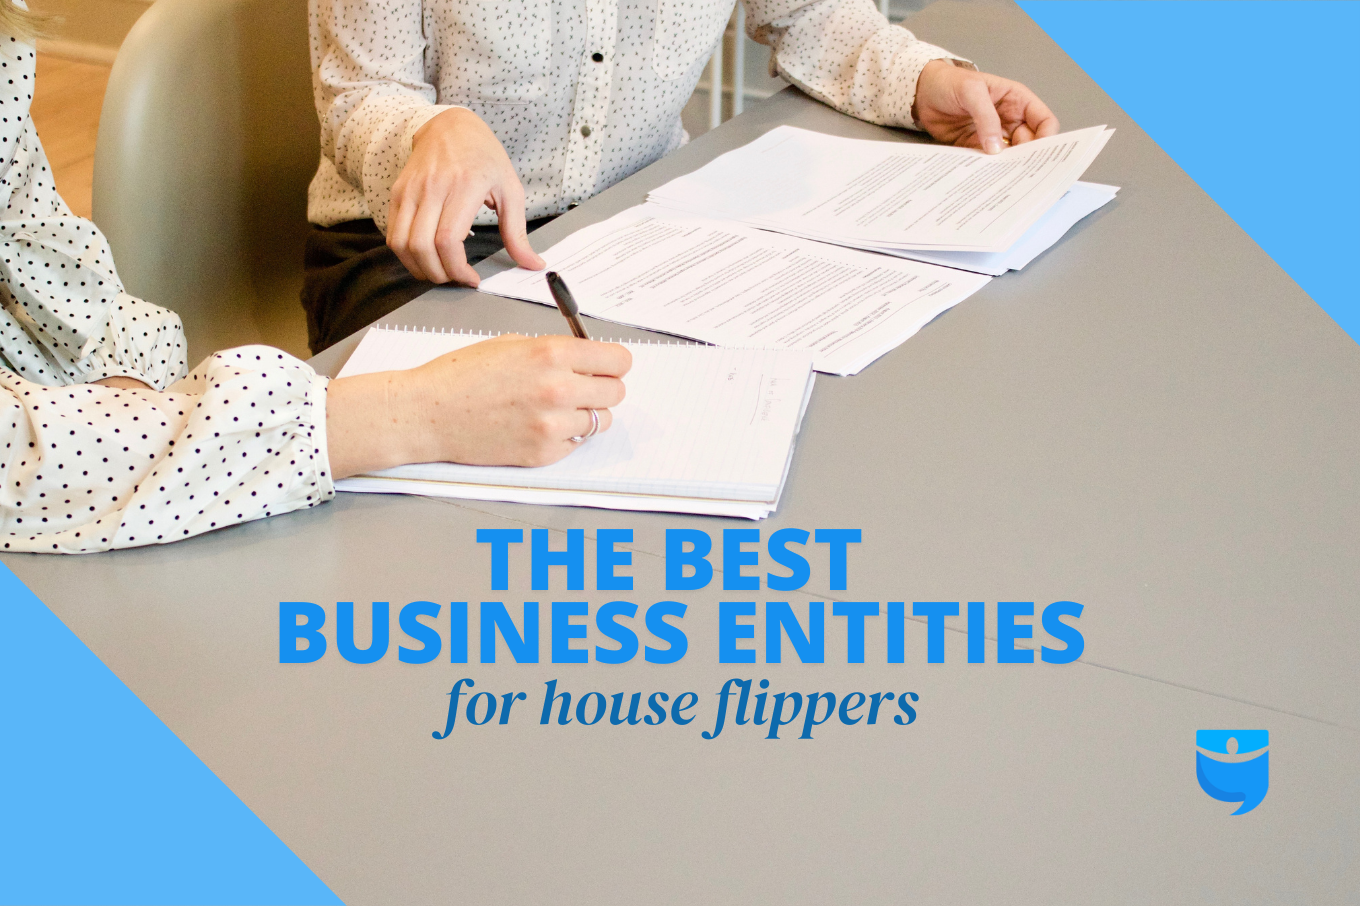 What’s the Most Powerful Business Entity for House Flippers?